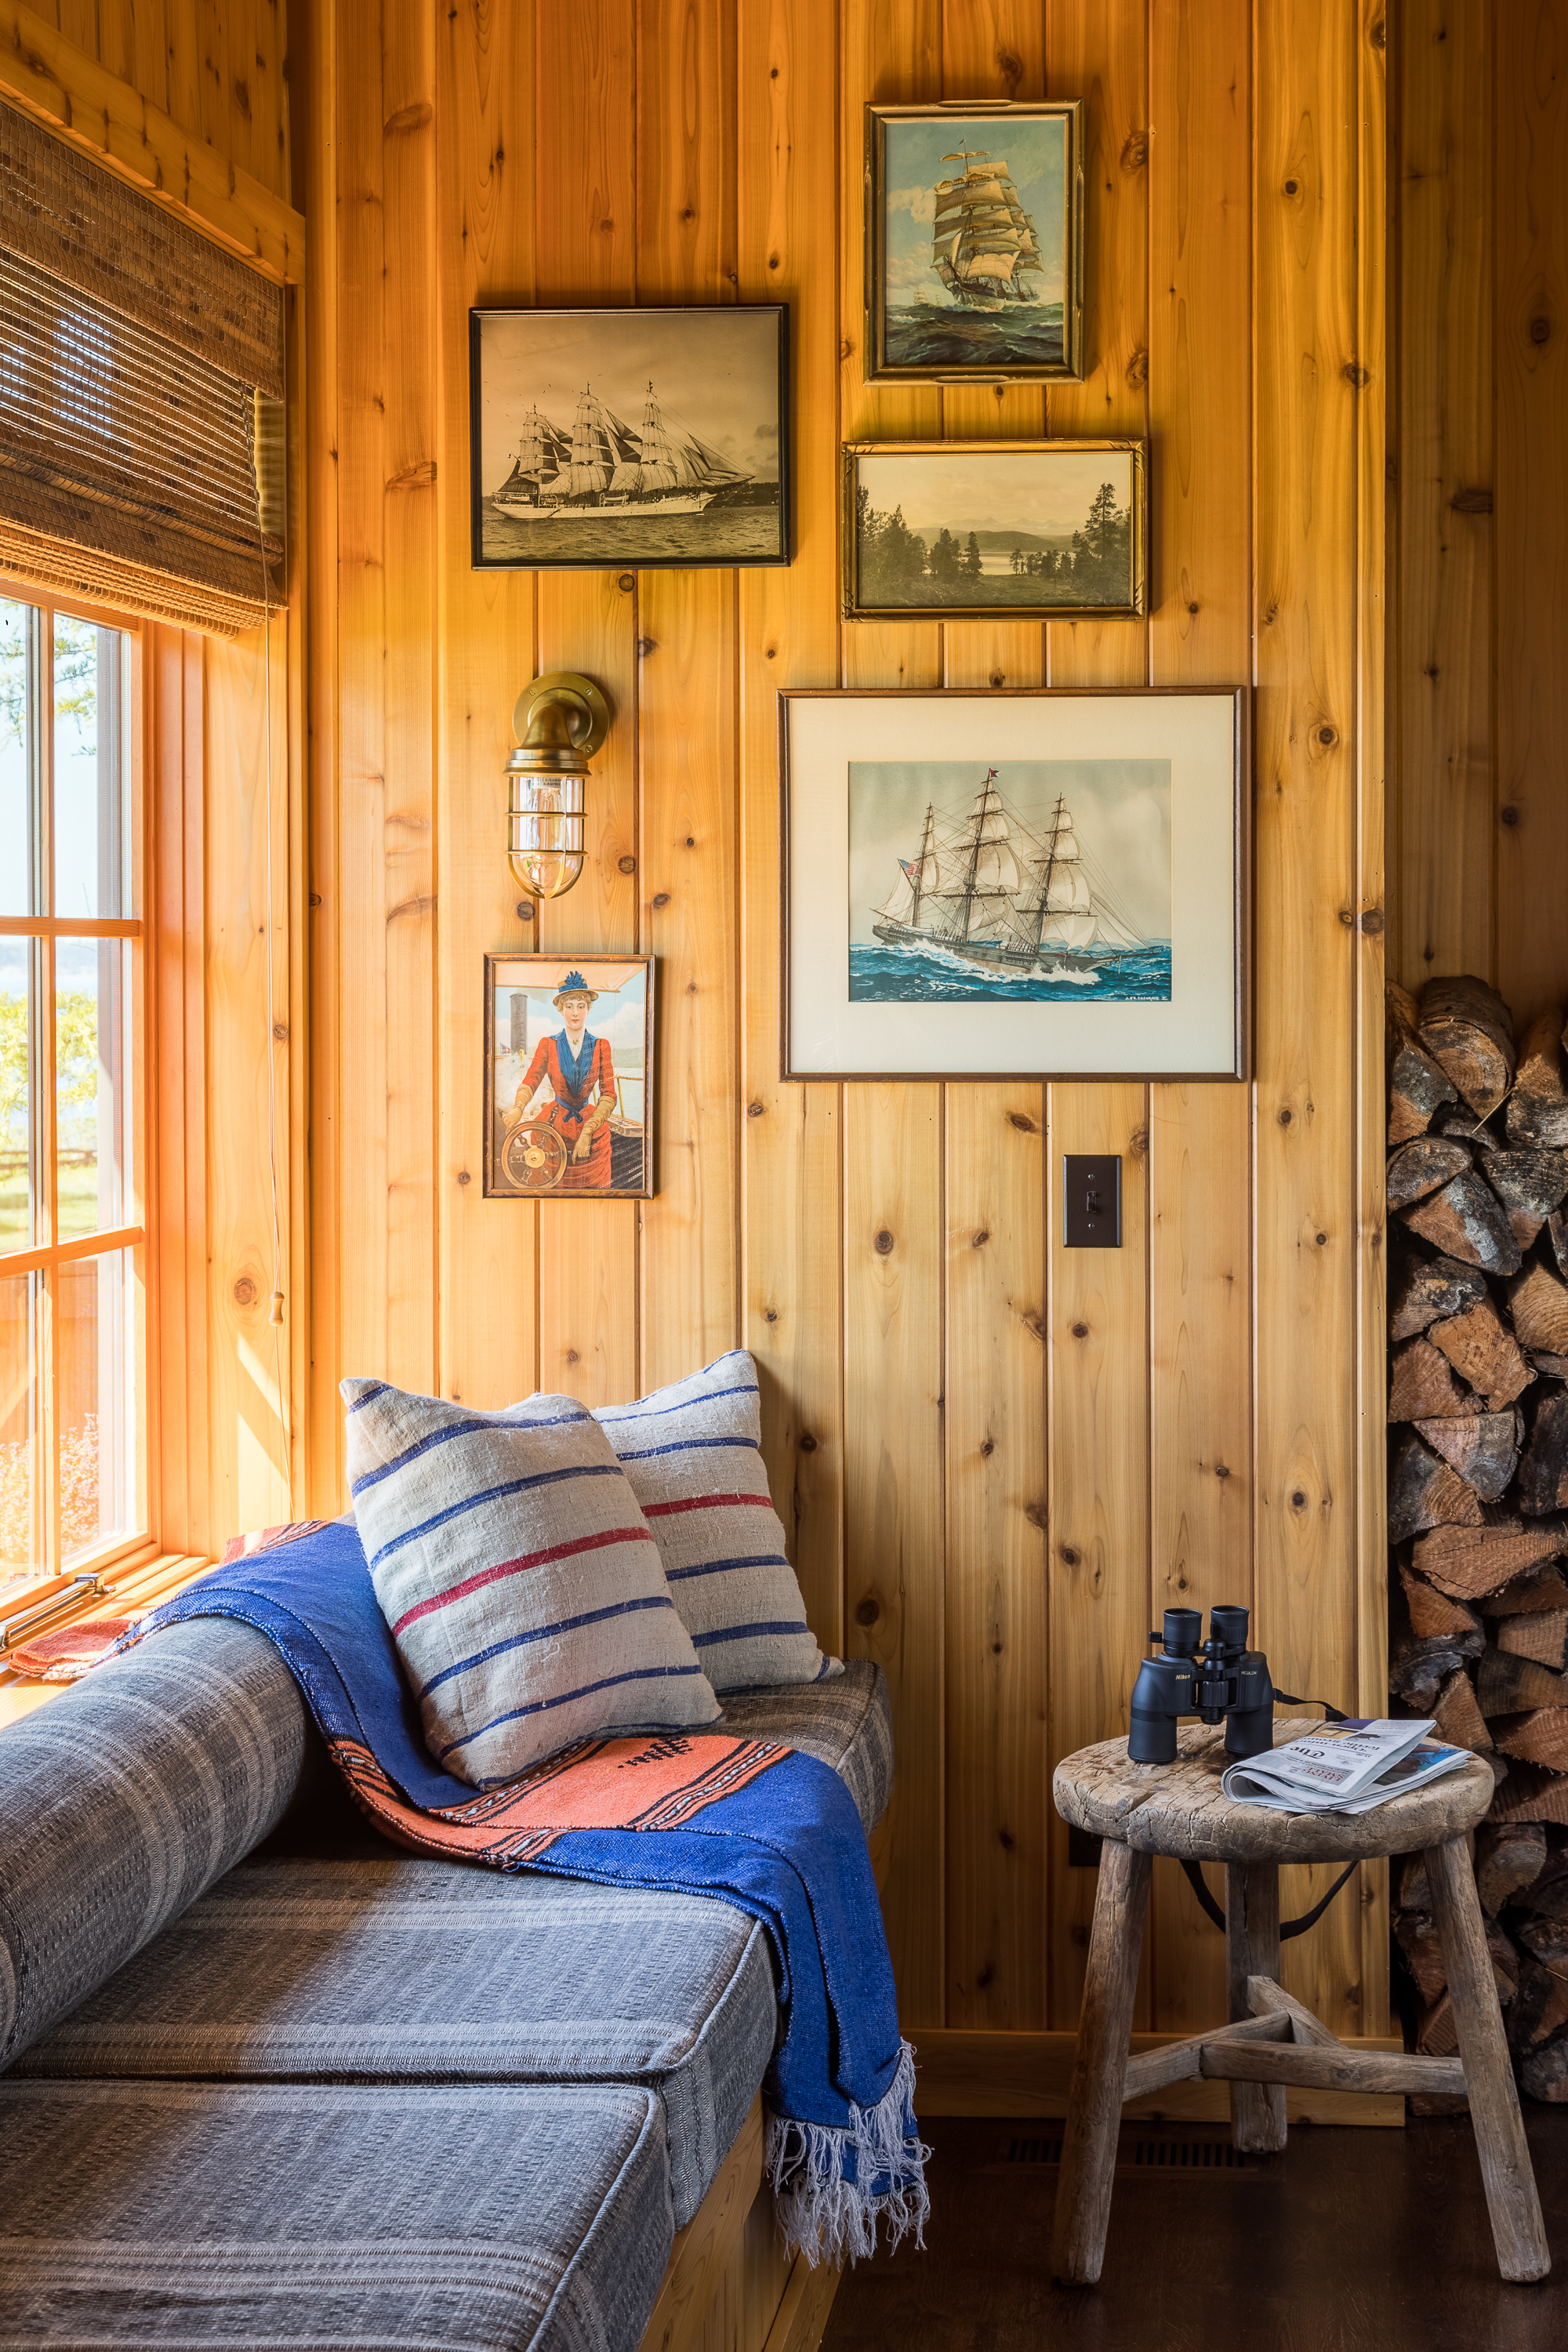 In a quiet corner of the great room, built-in bench seating invites relaxation, while a small gallery wall of nautical paintings adds a touch of maritime charm and personalization.